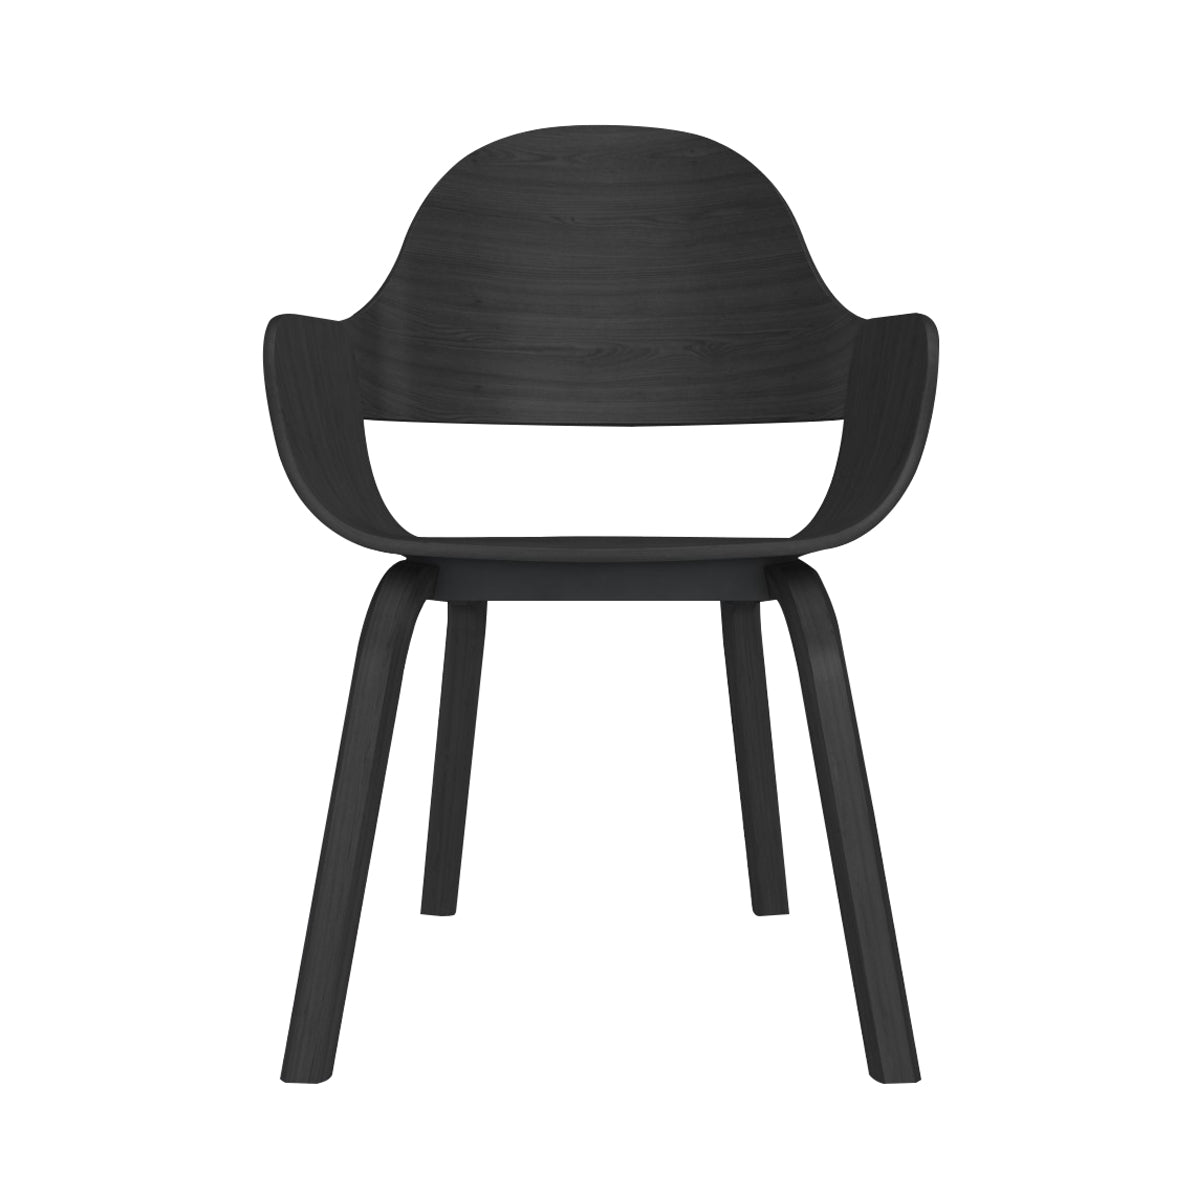 Showtime Nude Chair: Ash Stained Black +  Ash Stained Black